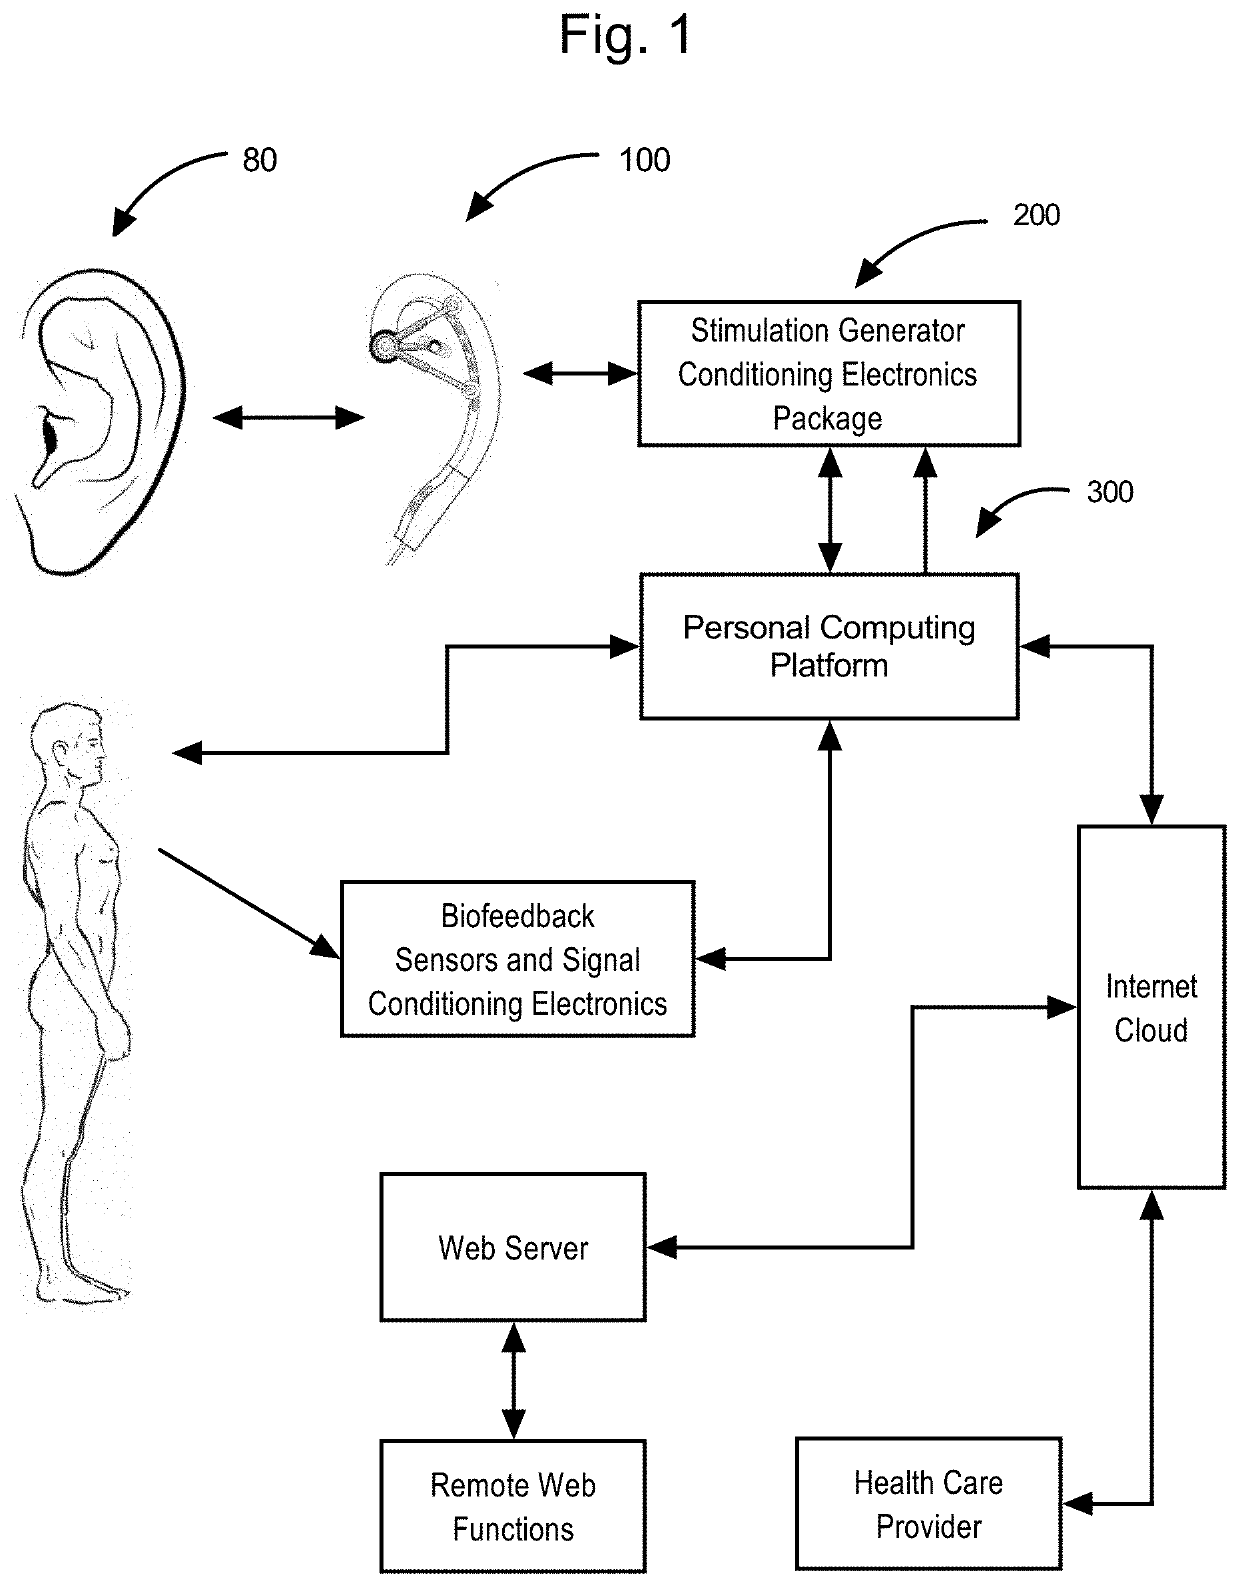 Multimodal Transcutaneous Auricular Stimulation System Including Methods and Apparatus for Self Treatment, Feedback Collection and Remote Therapist Control